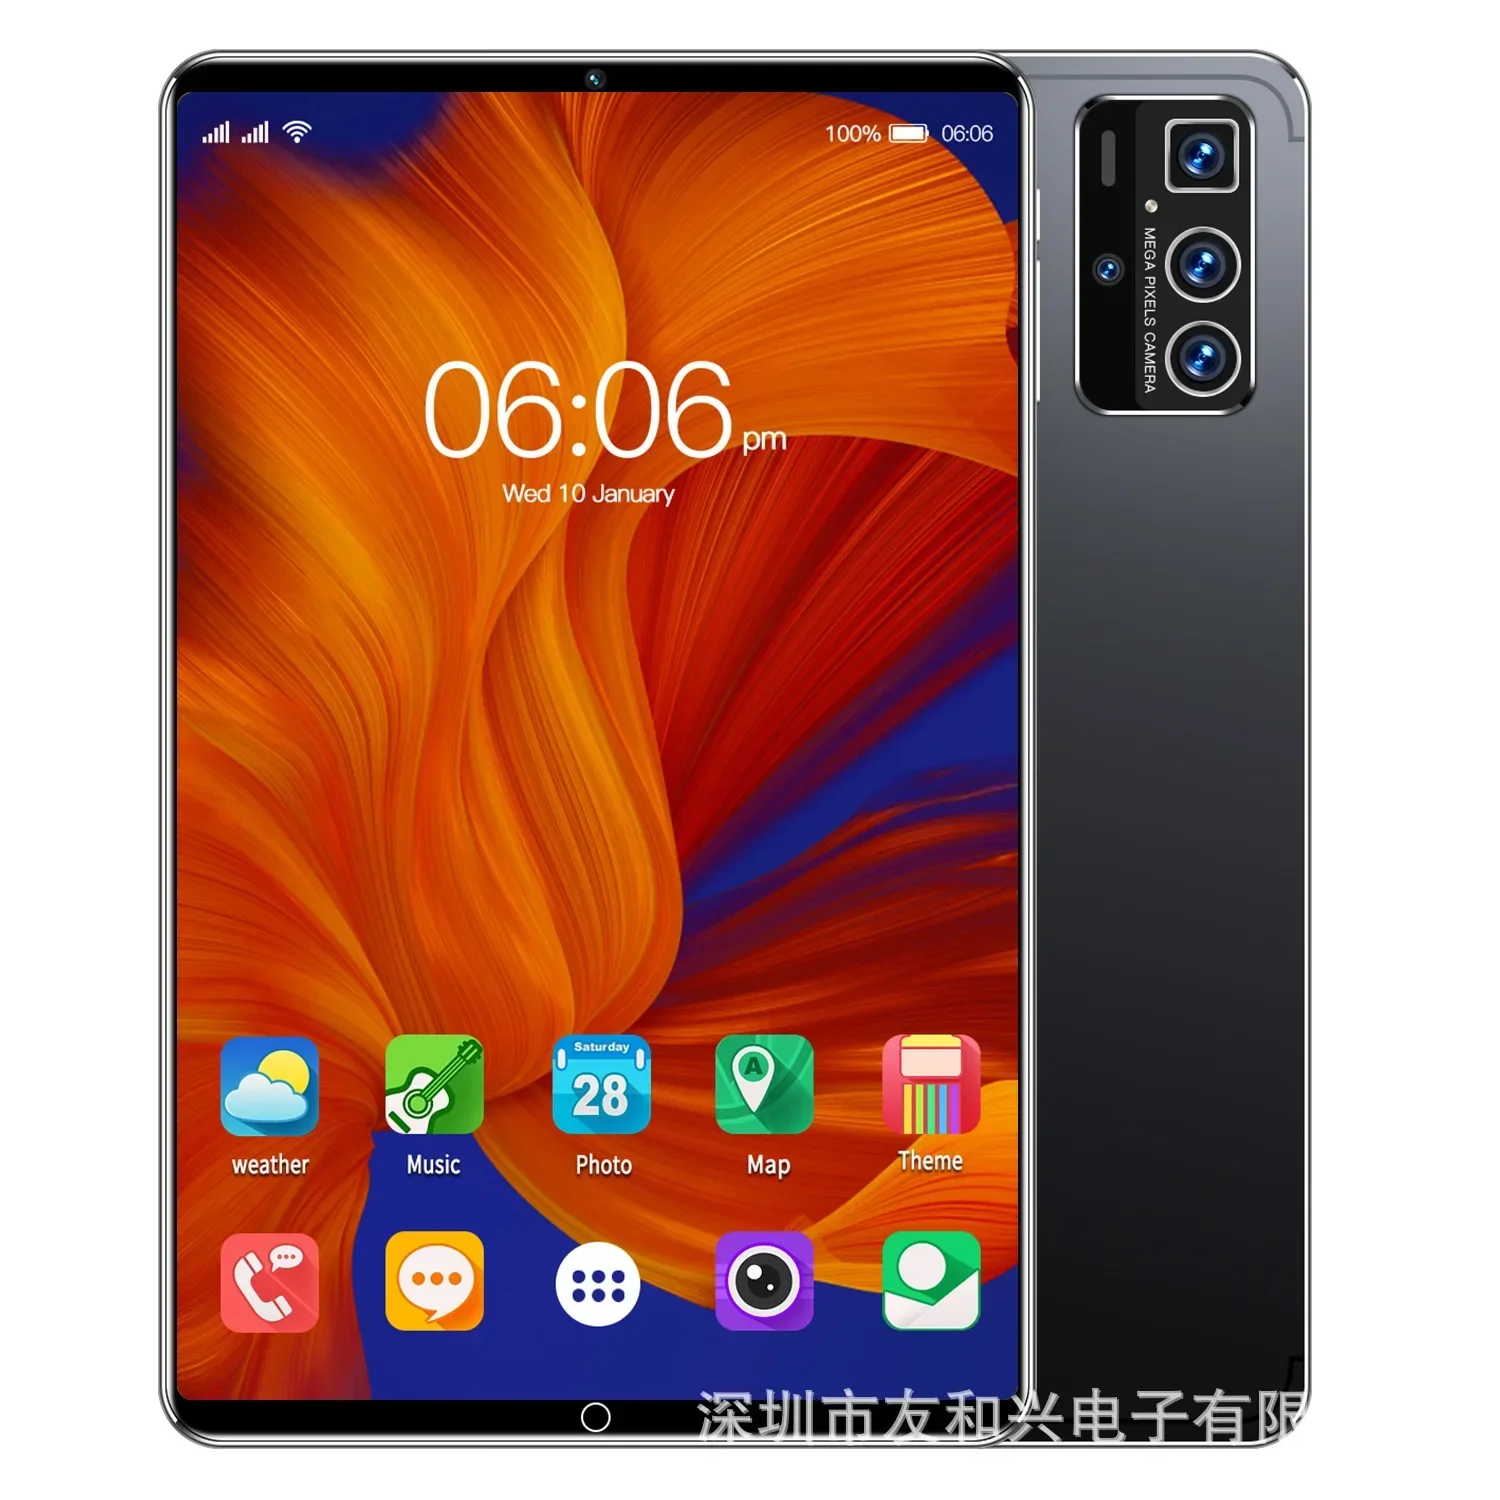 

2023 New 14Pro Android 7.1 10.1" inch IPS Screen Tablet PC 1280x800 2GB RAM+16GB ROM Octa-core Bluetooth Wi-Fi Dual Cameras